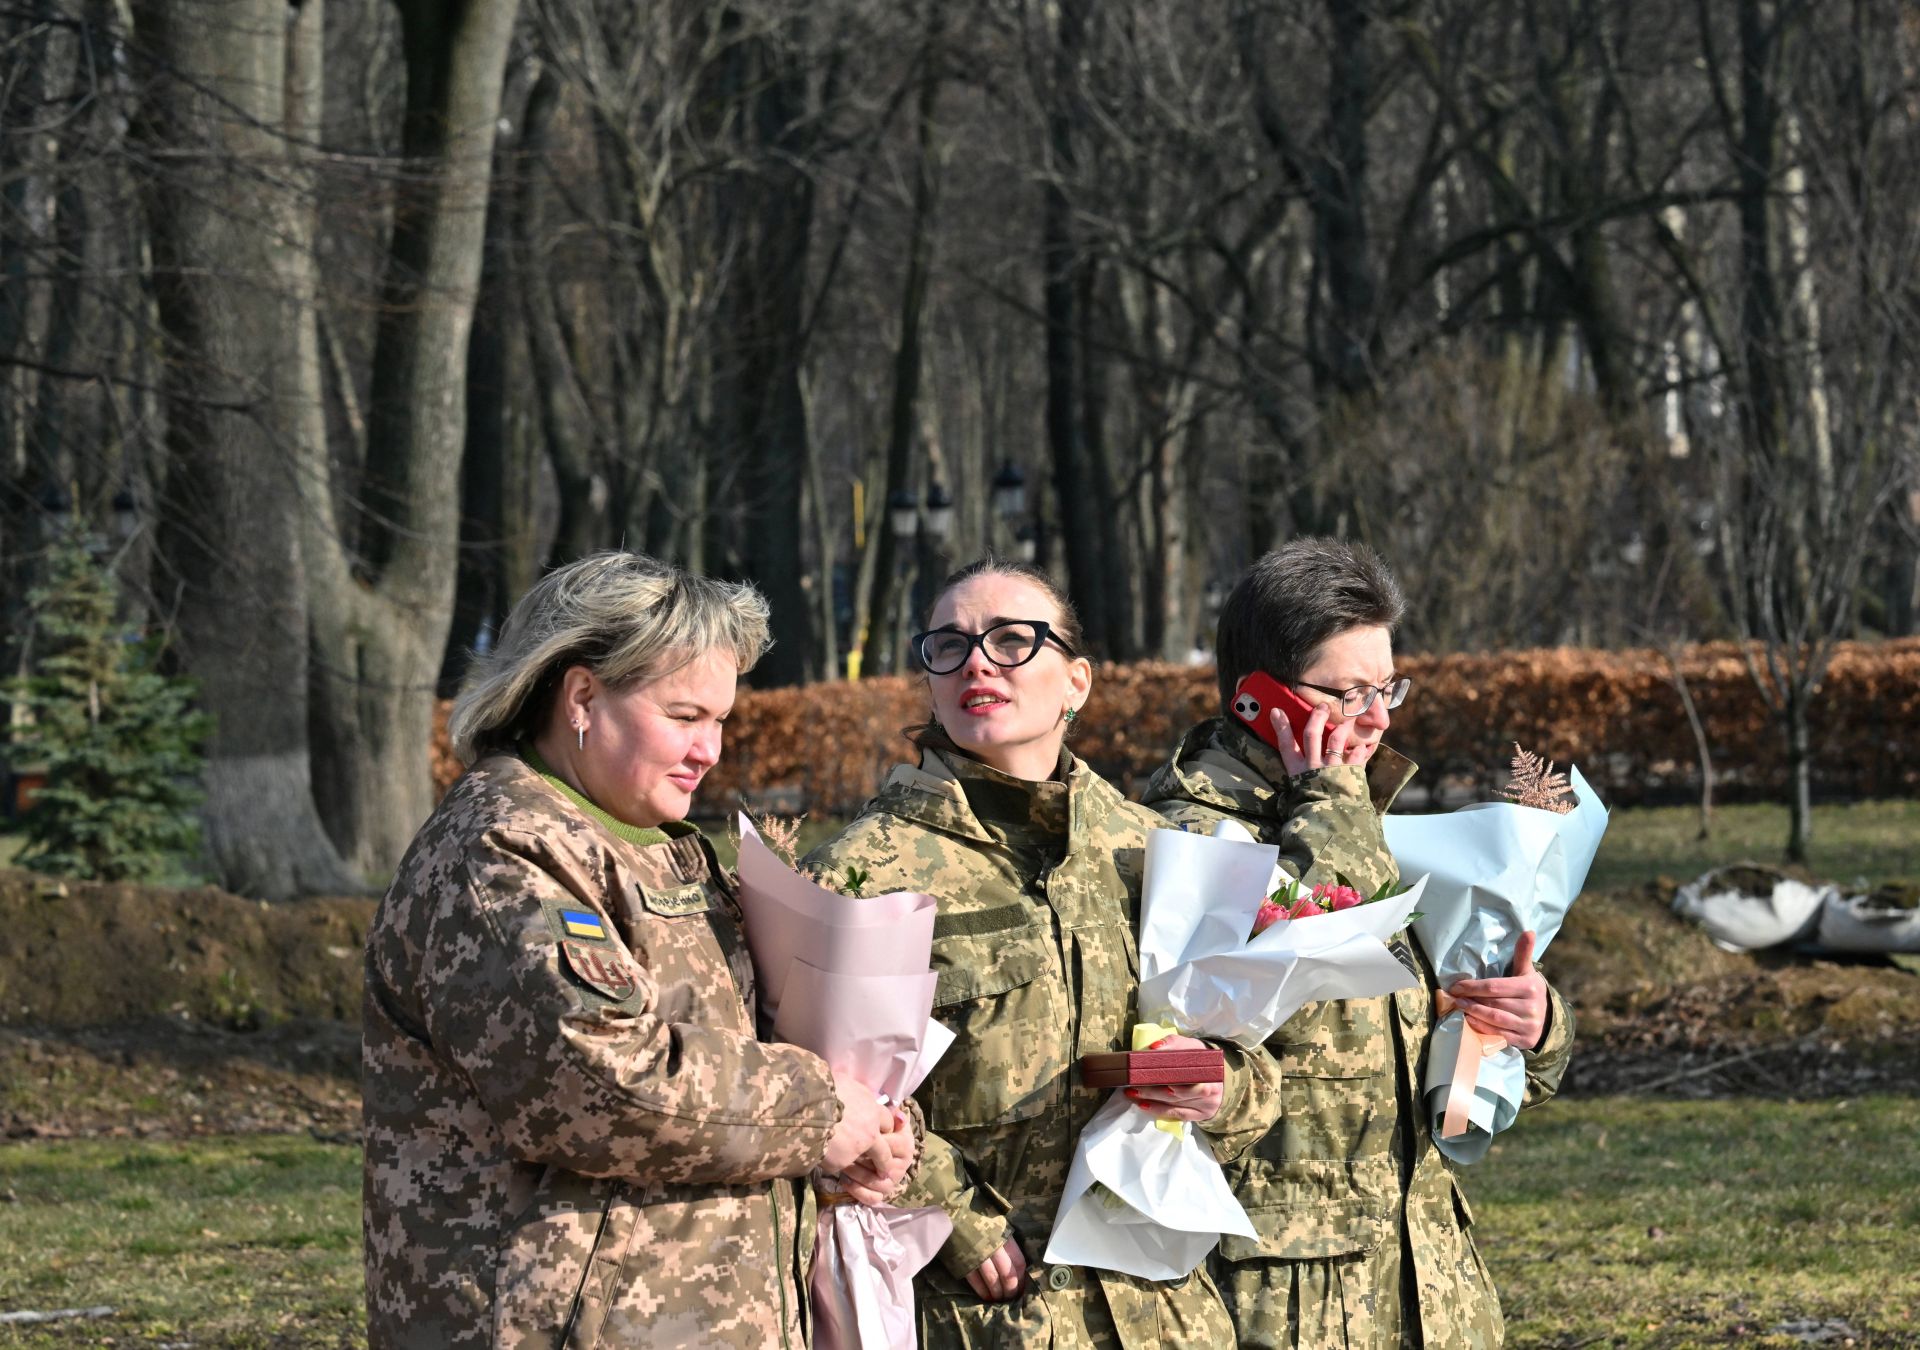 Ukraine Recruits Women Soldiers. Why Doesn’t Russia?